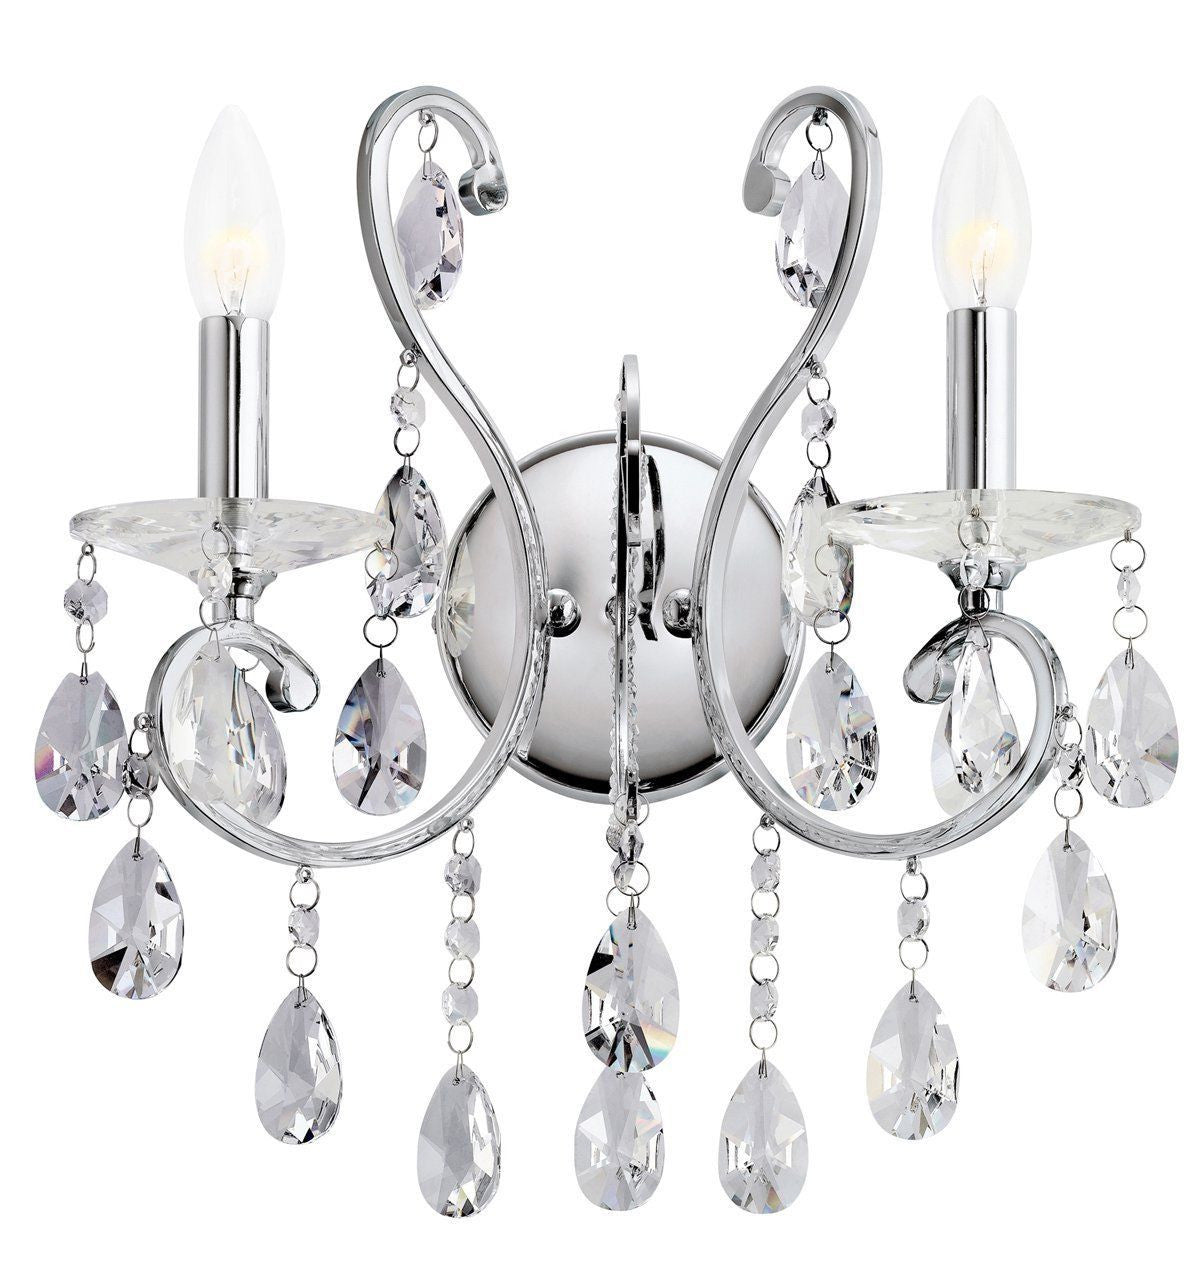 Kichler Lighting 6013 CH Marcalina Collection Two Light Wall Sconce in Polished Chrome Finish